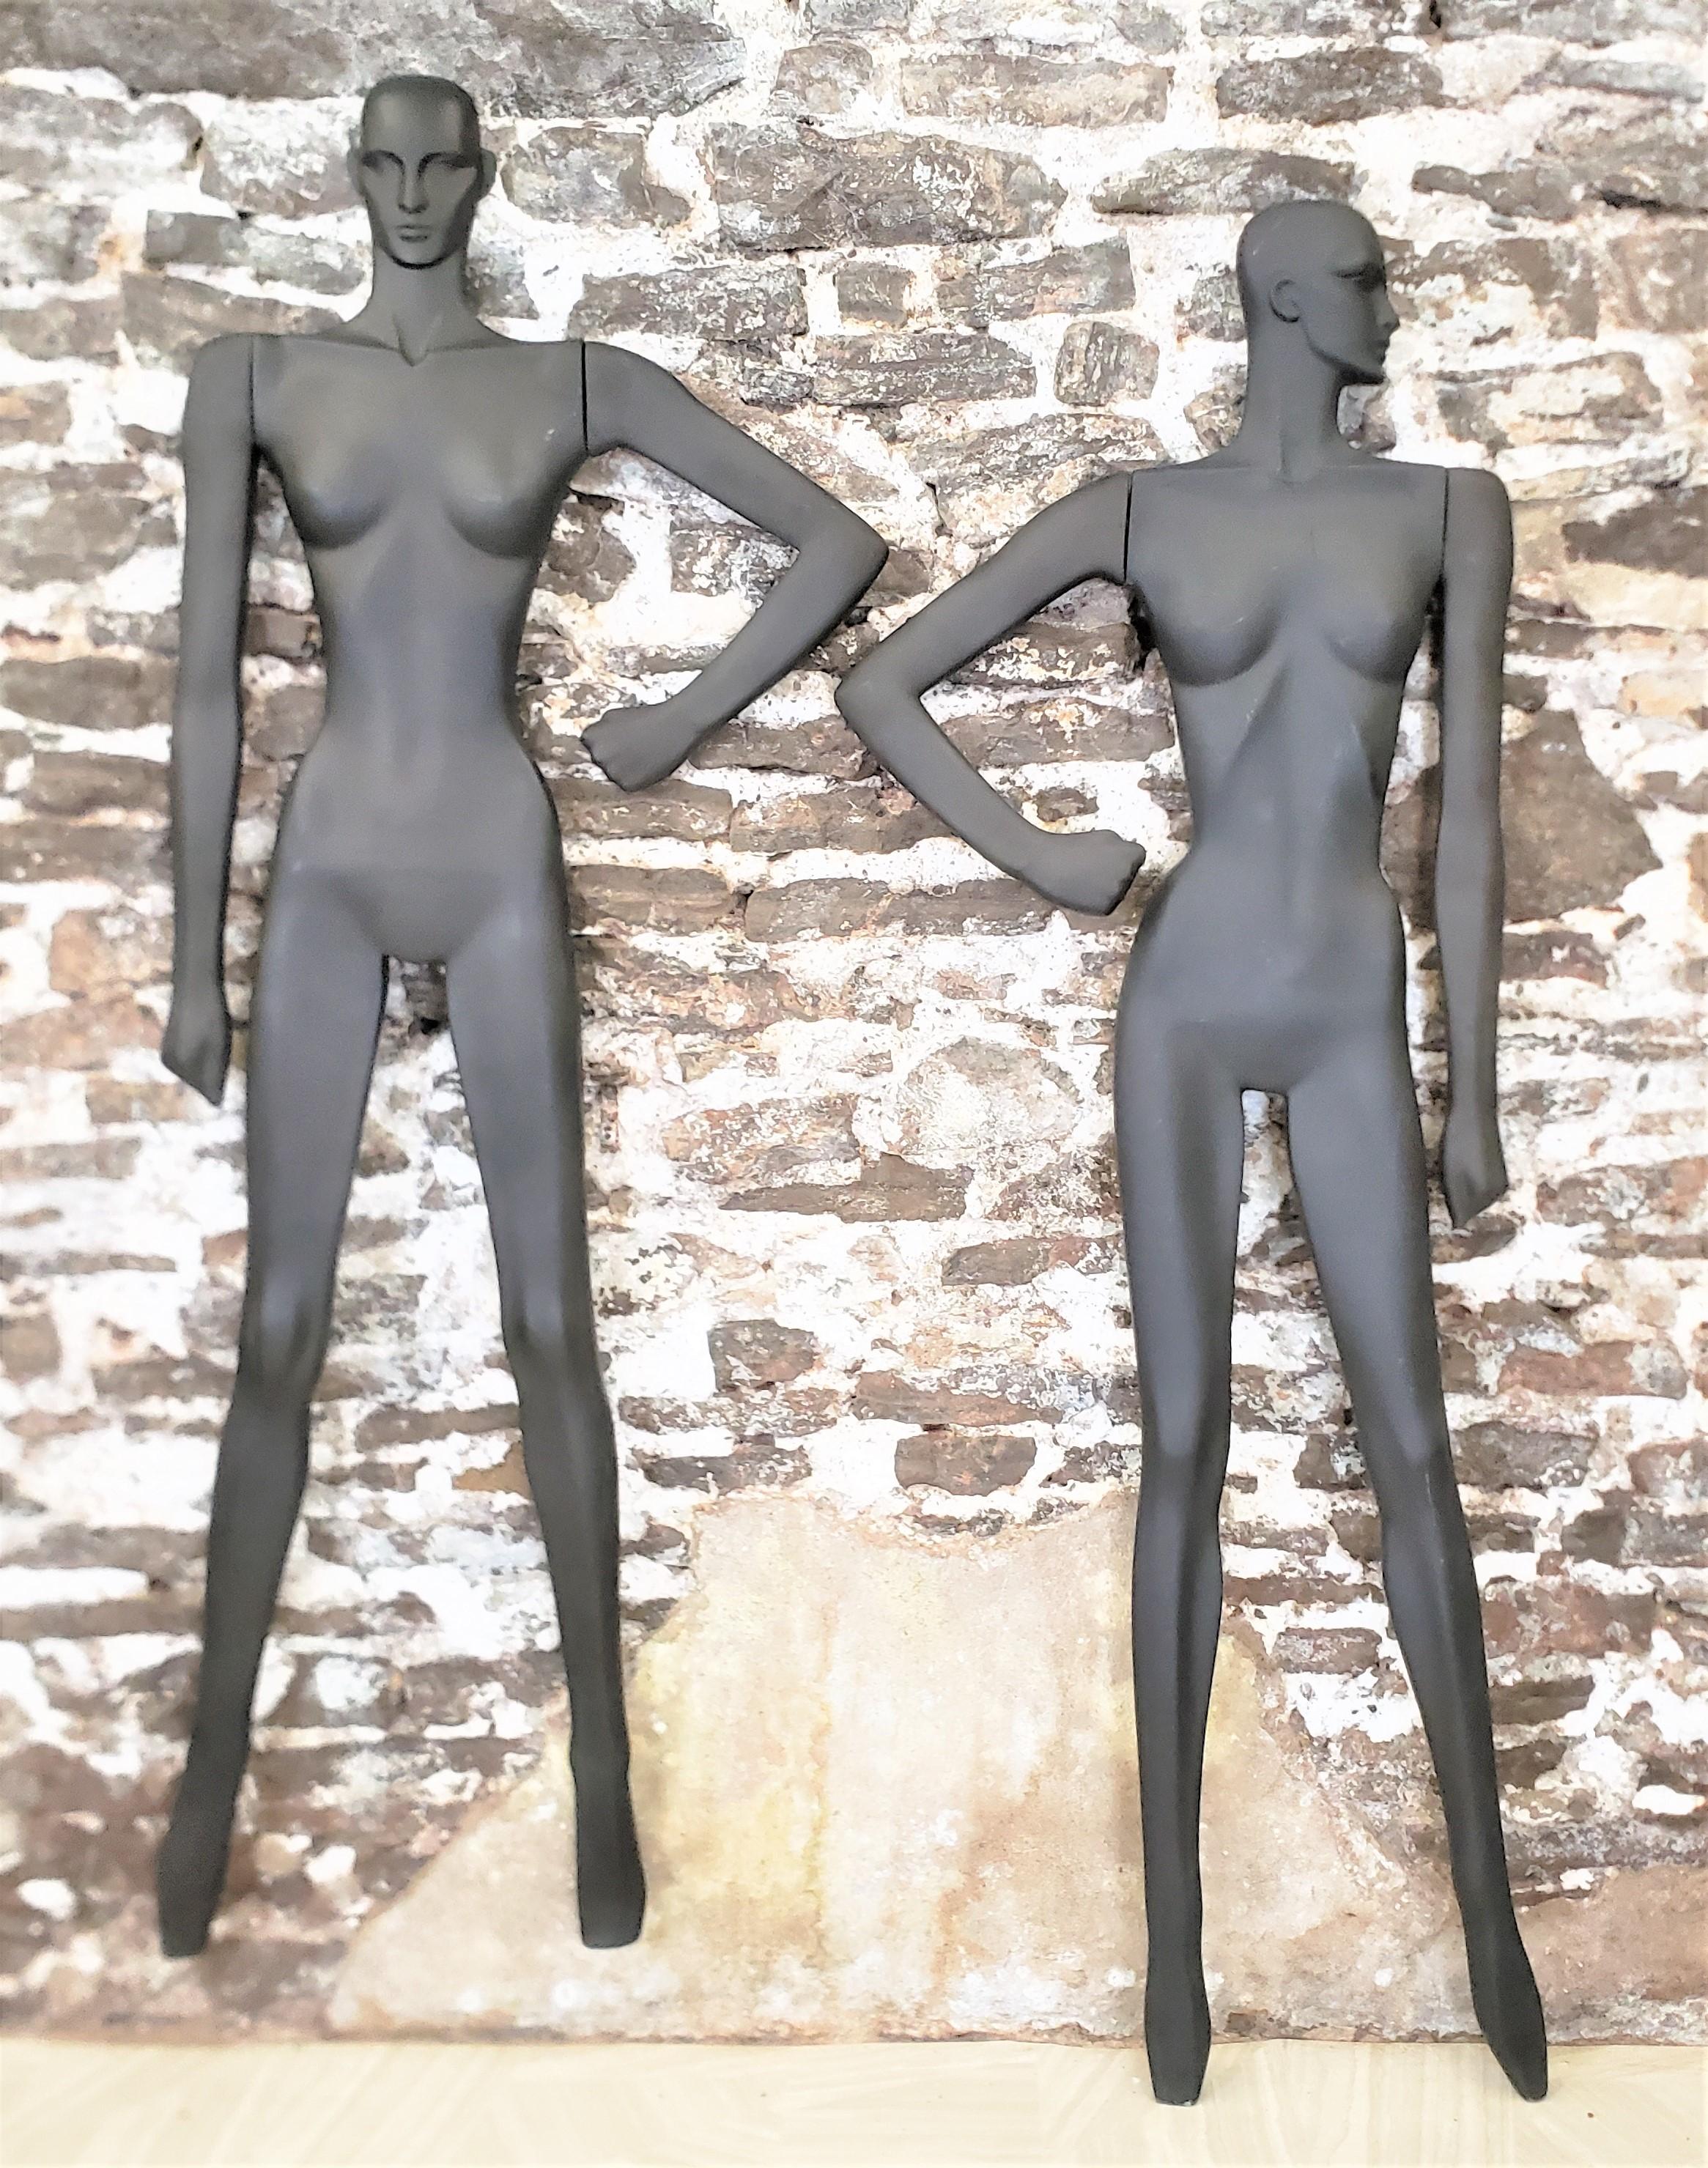 This pair of wall mounted sculptures are unsigned, but presumed to have originated from the United States and date to approximately 1970 and done in a Mid-Century Modern style. The sculptures are composed of a molded plastic and depict in